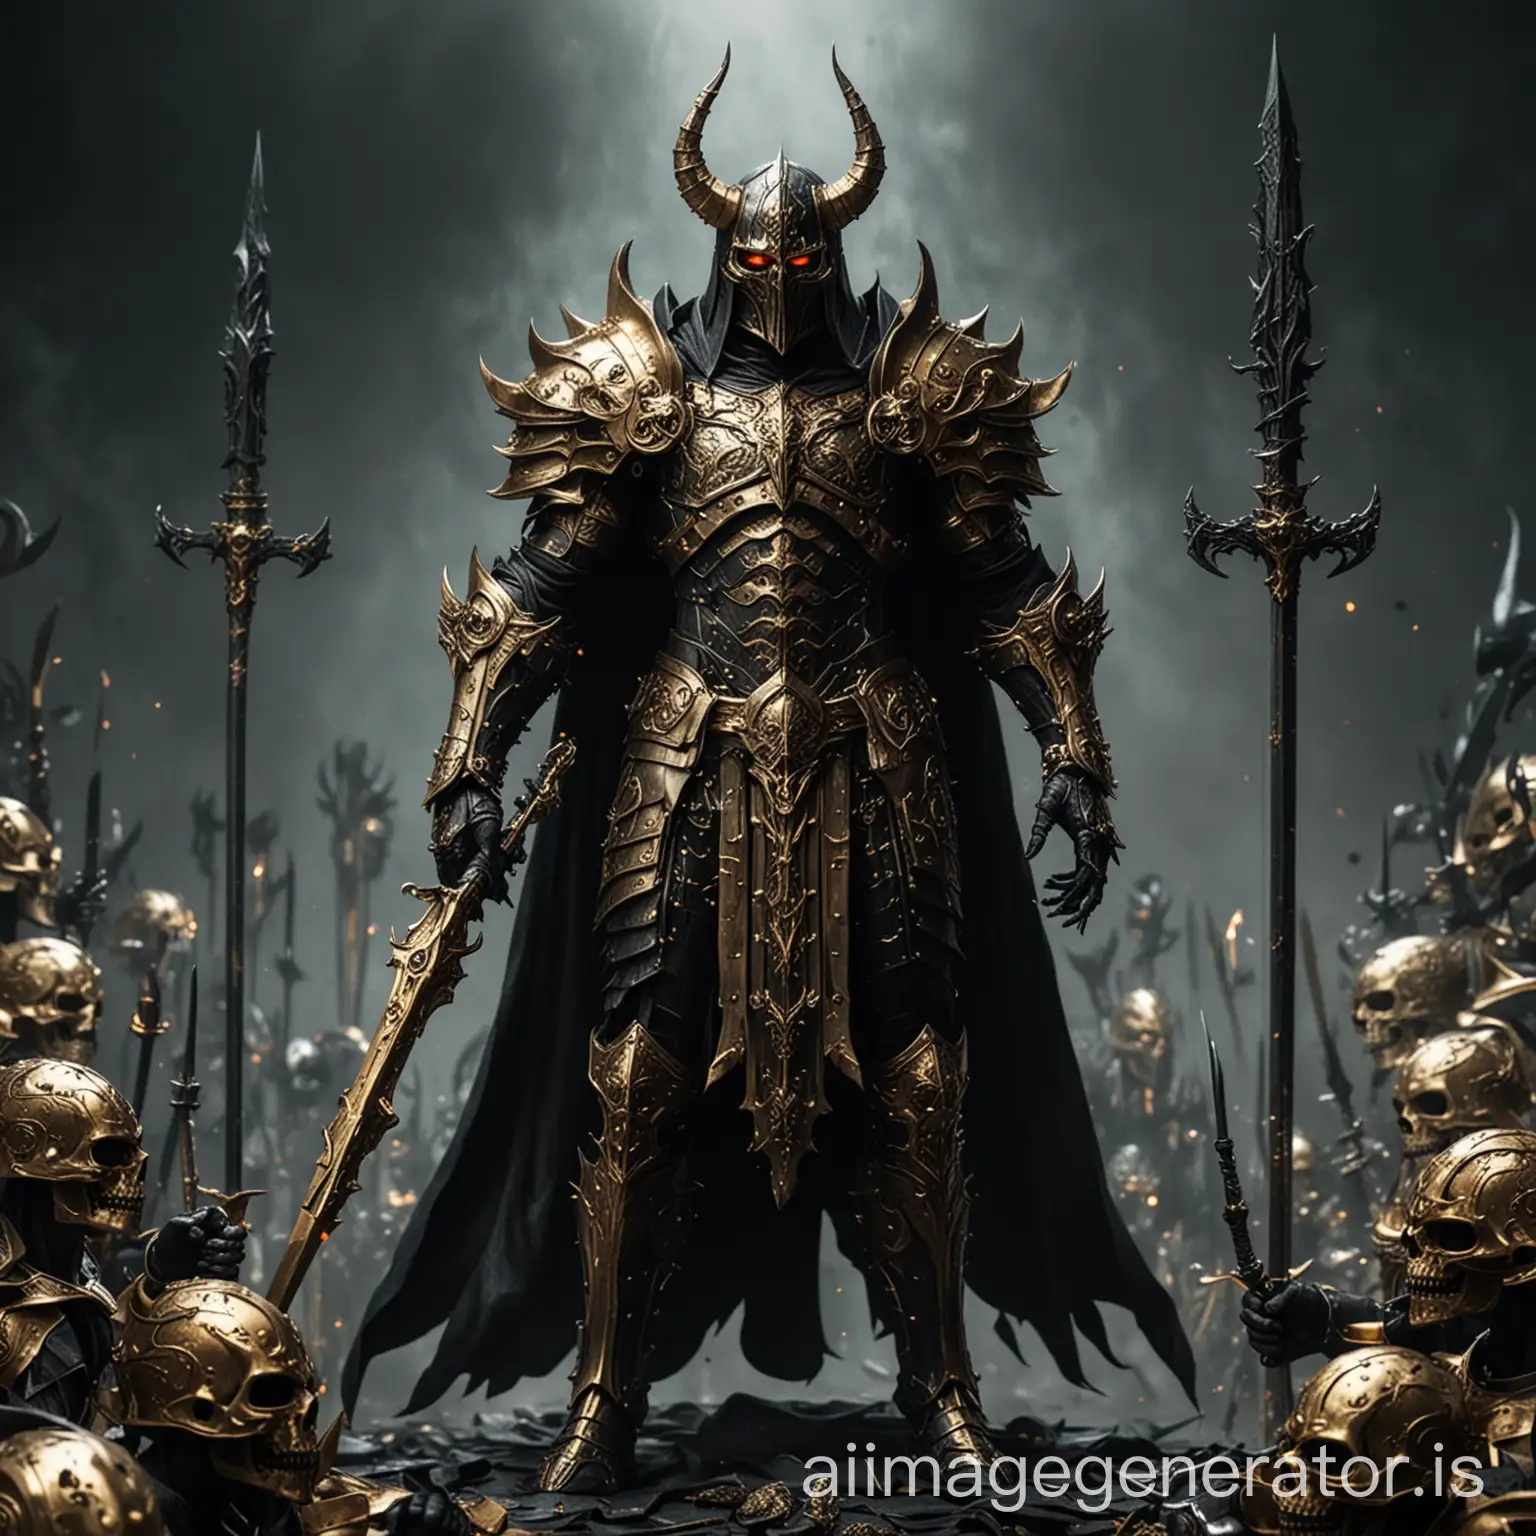 a dark lord with set of weapons and golden armor a divine king